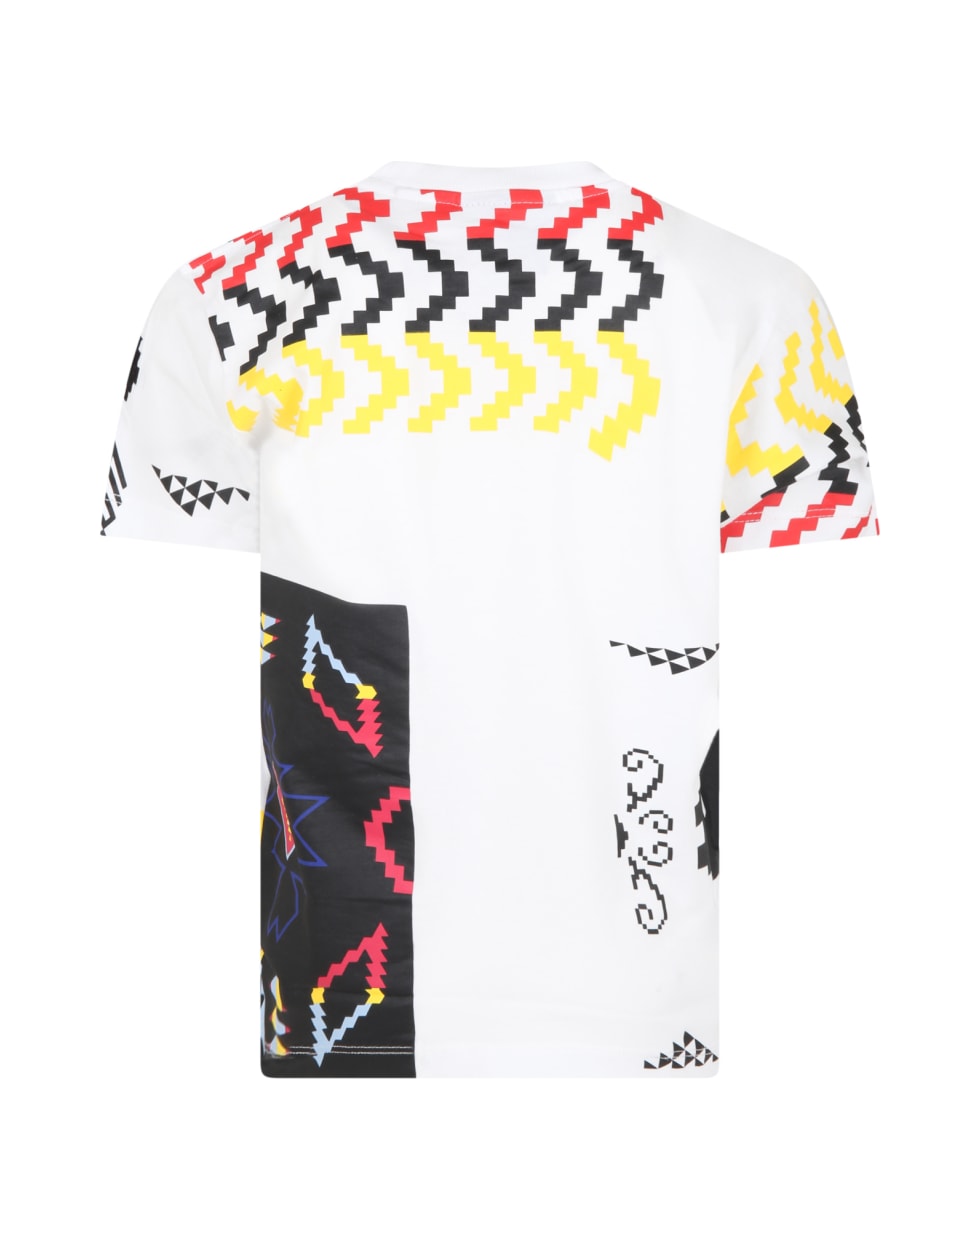 Marcelo Burlon White T-shirt For Boy With Iconic Wings - Bianco